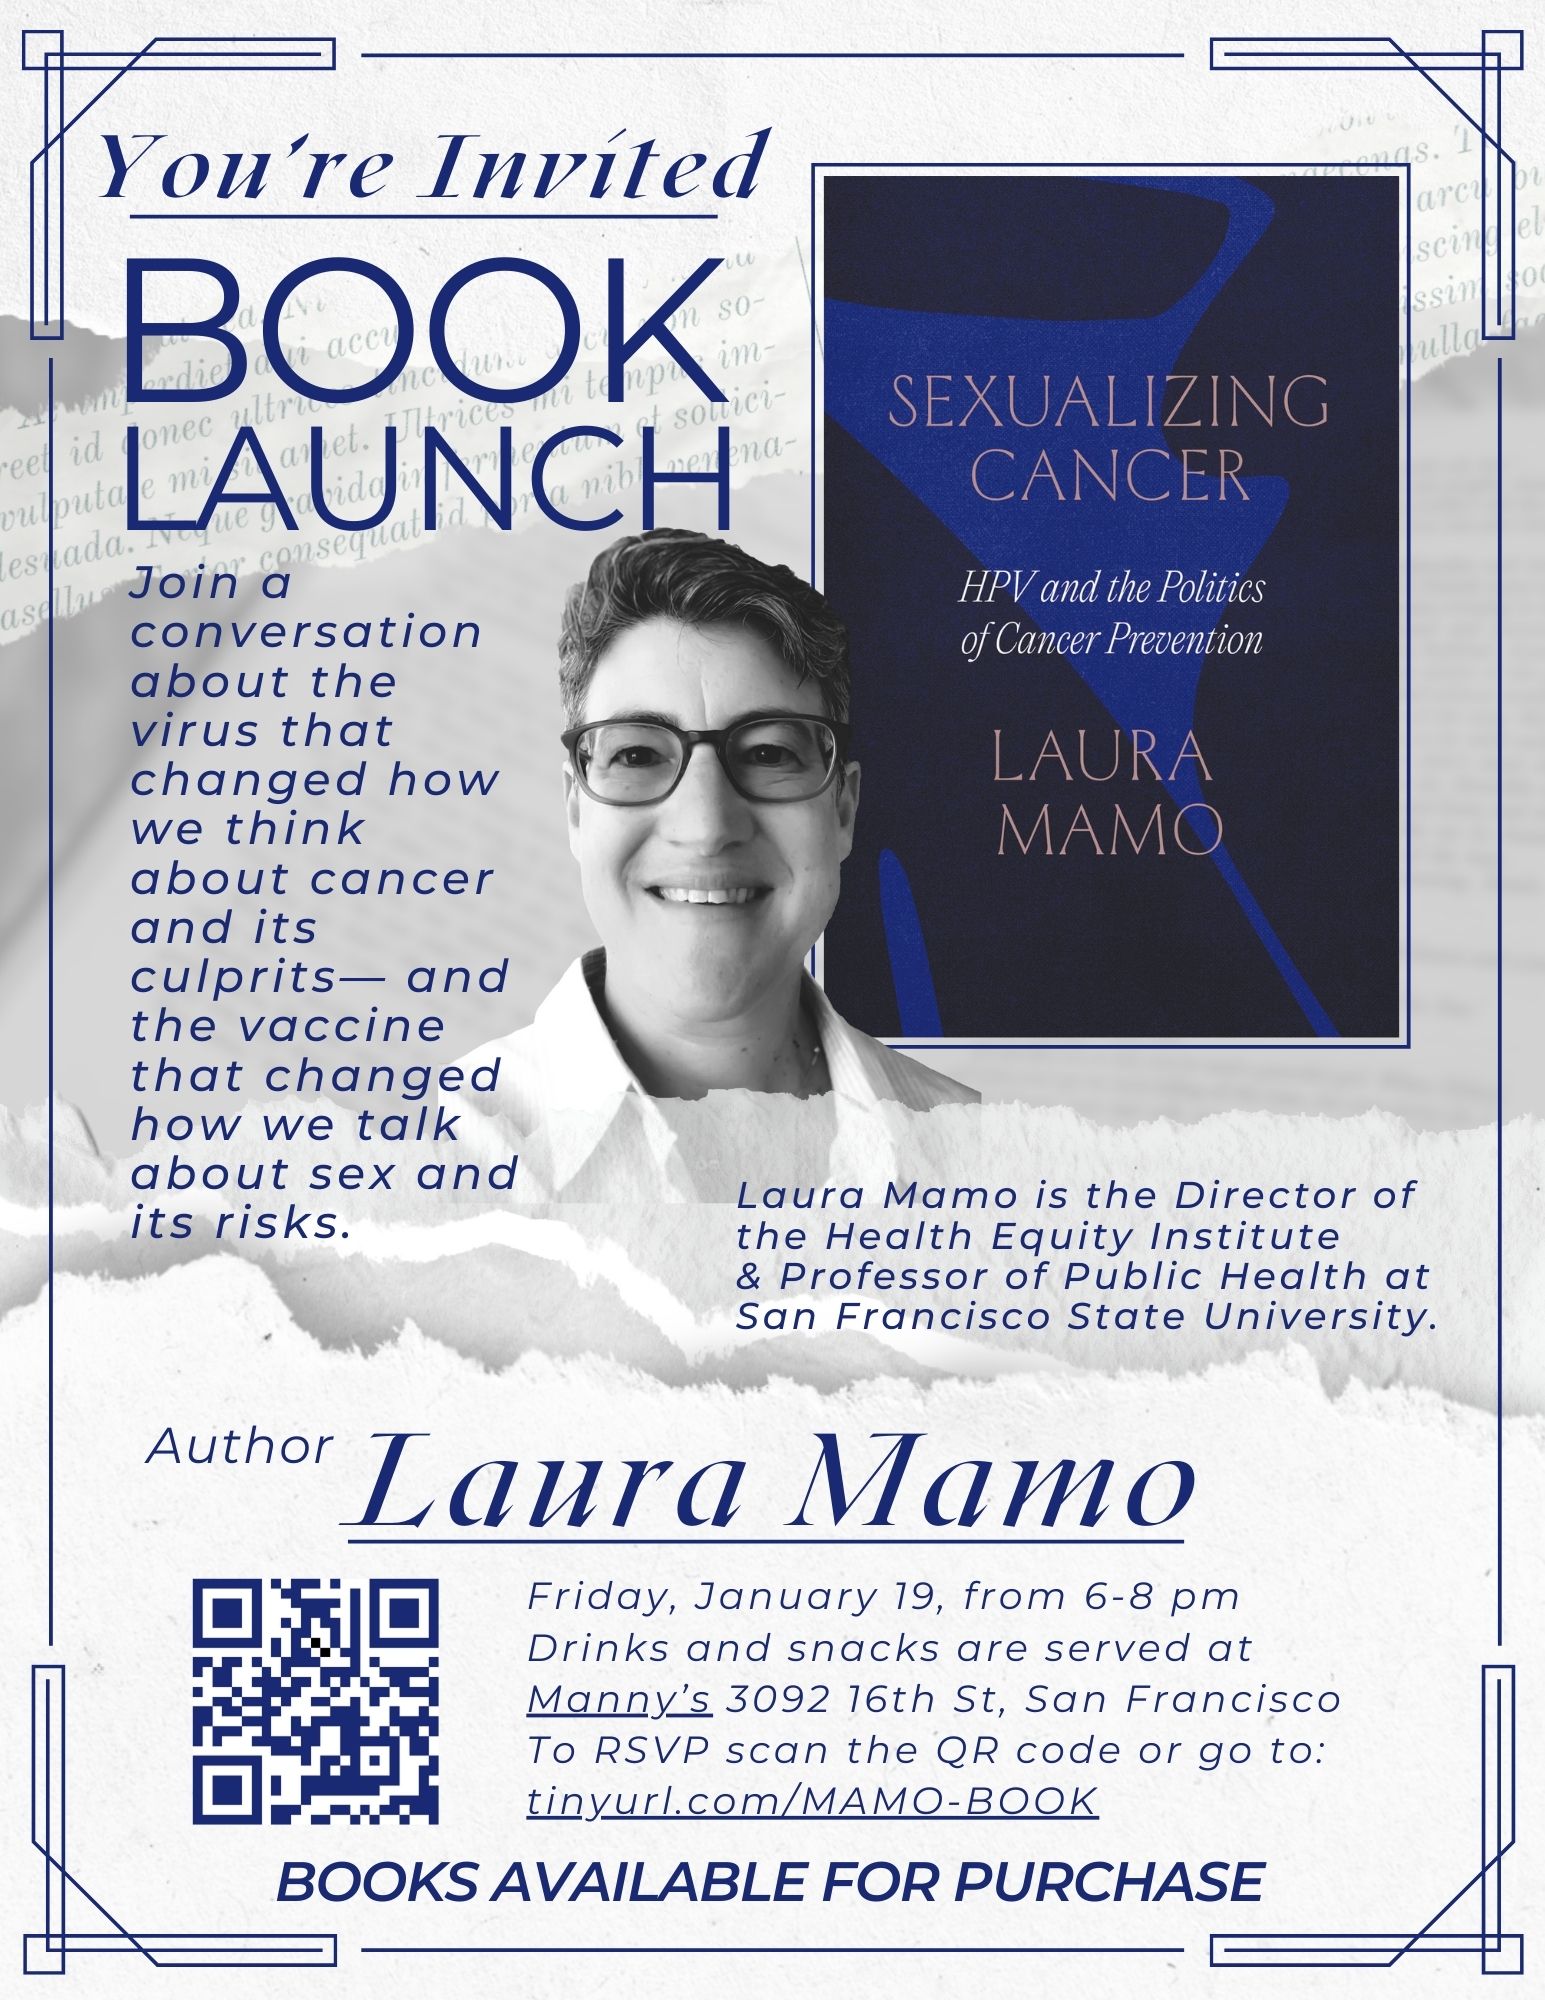 A flyer advertising Laura Mamo's book launch event for Sexualizing Cancer